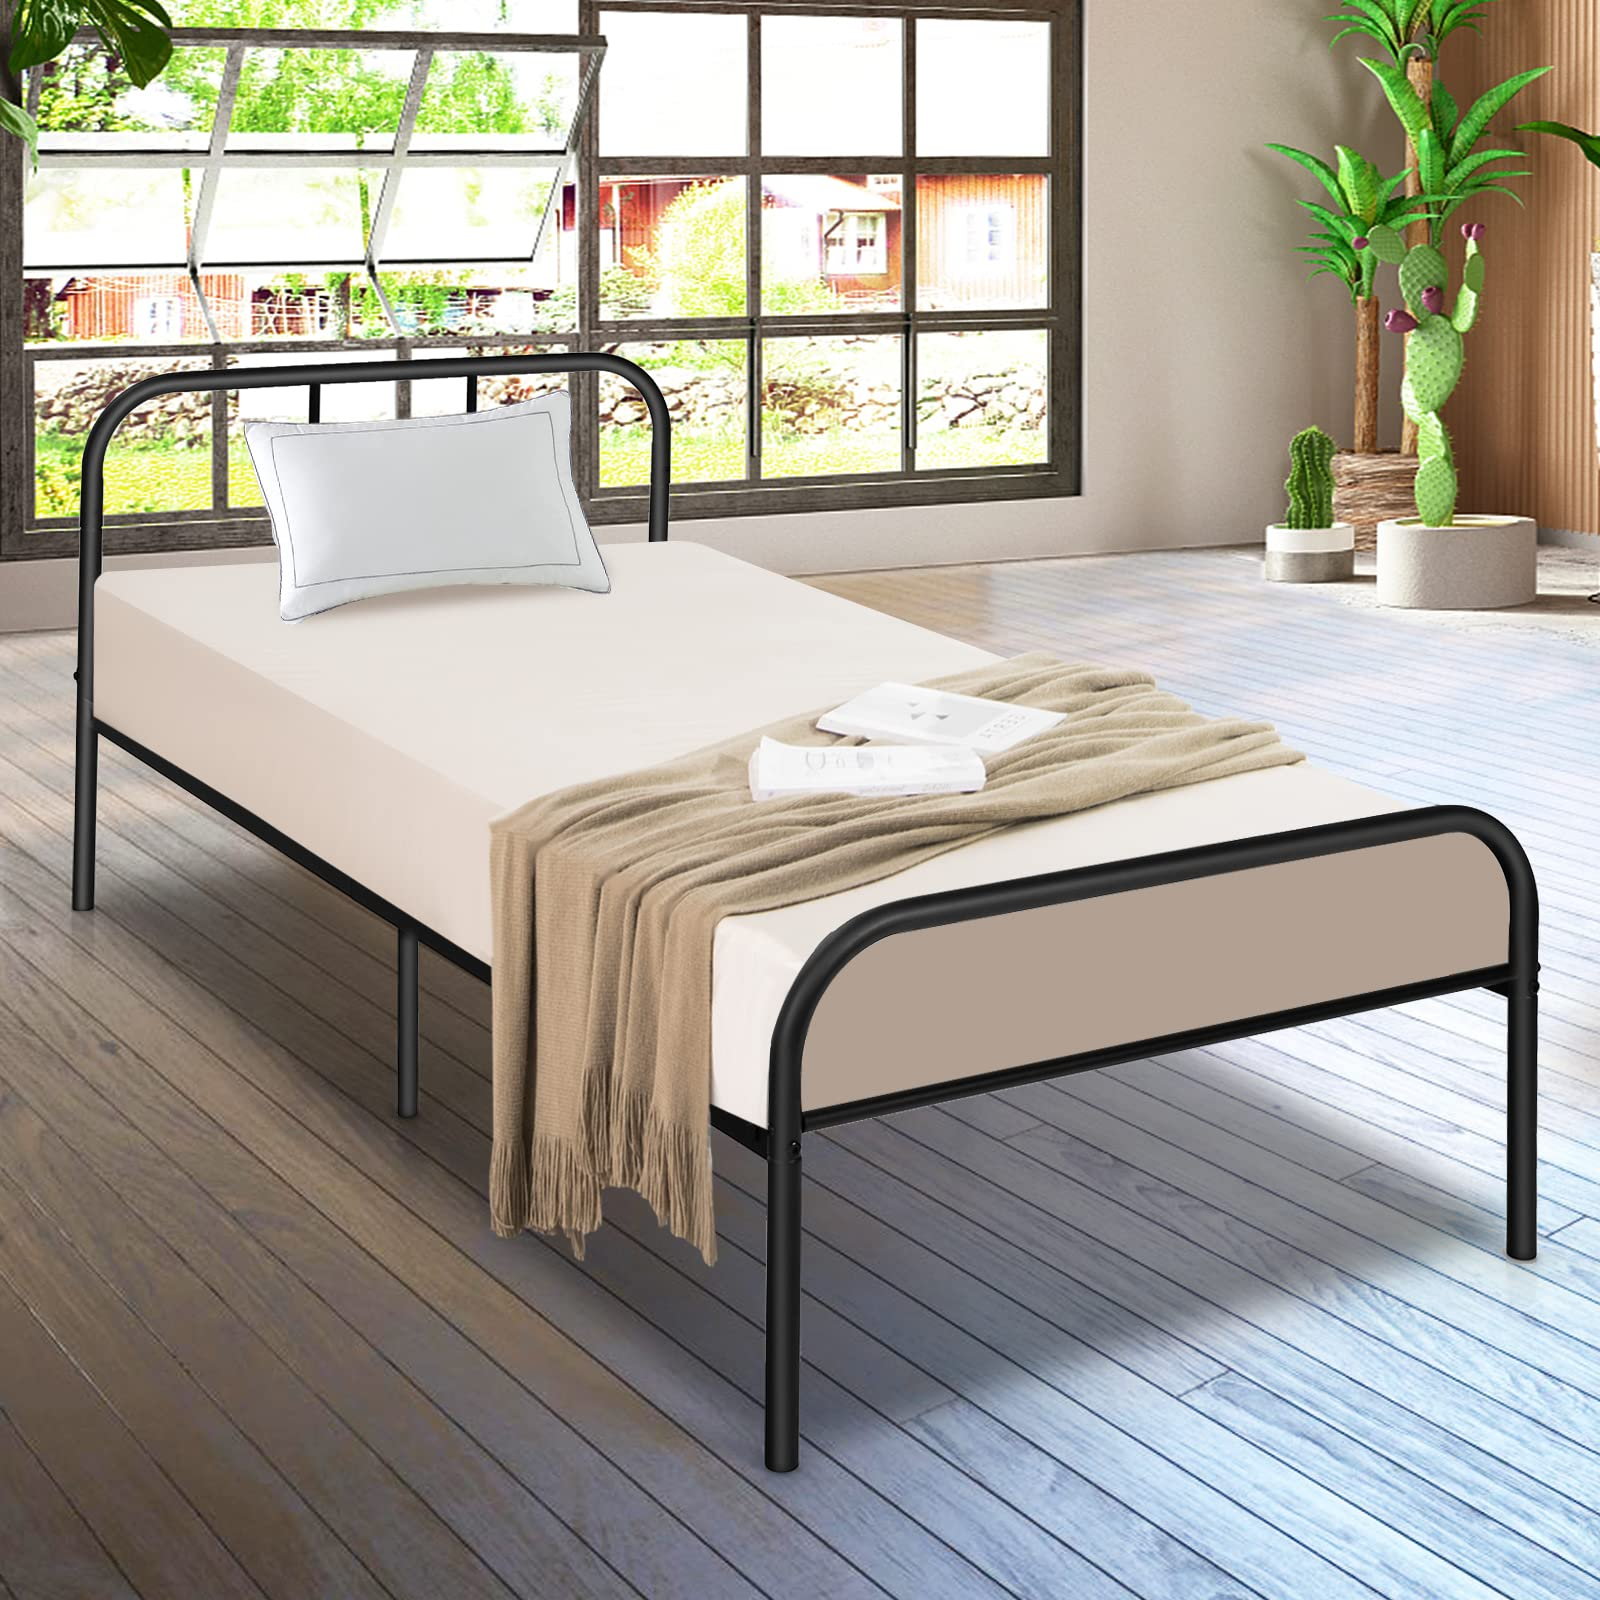 Modern Platform Bed with Curved Headboard and Footboard